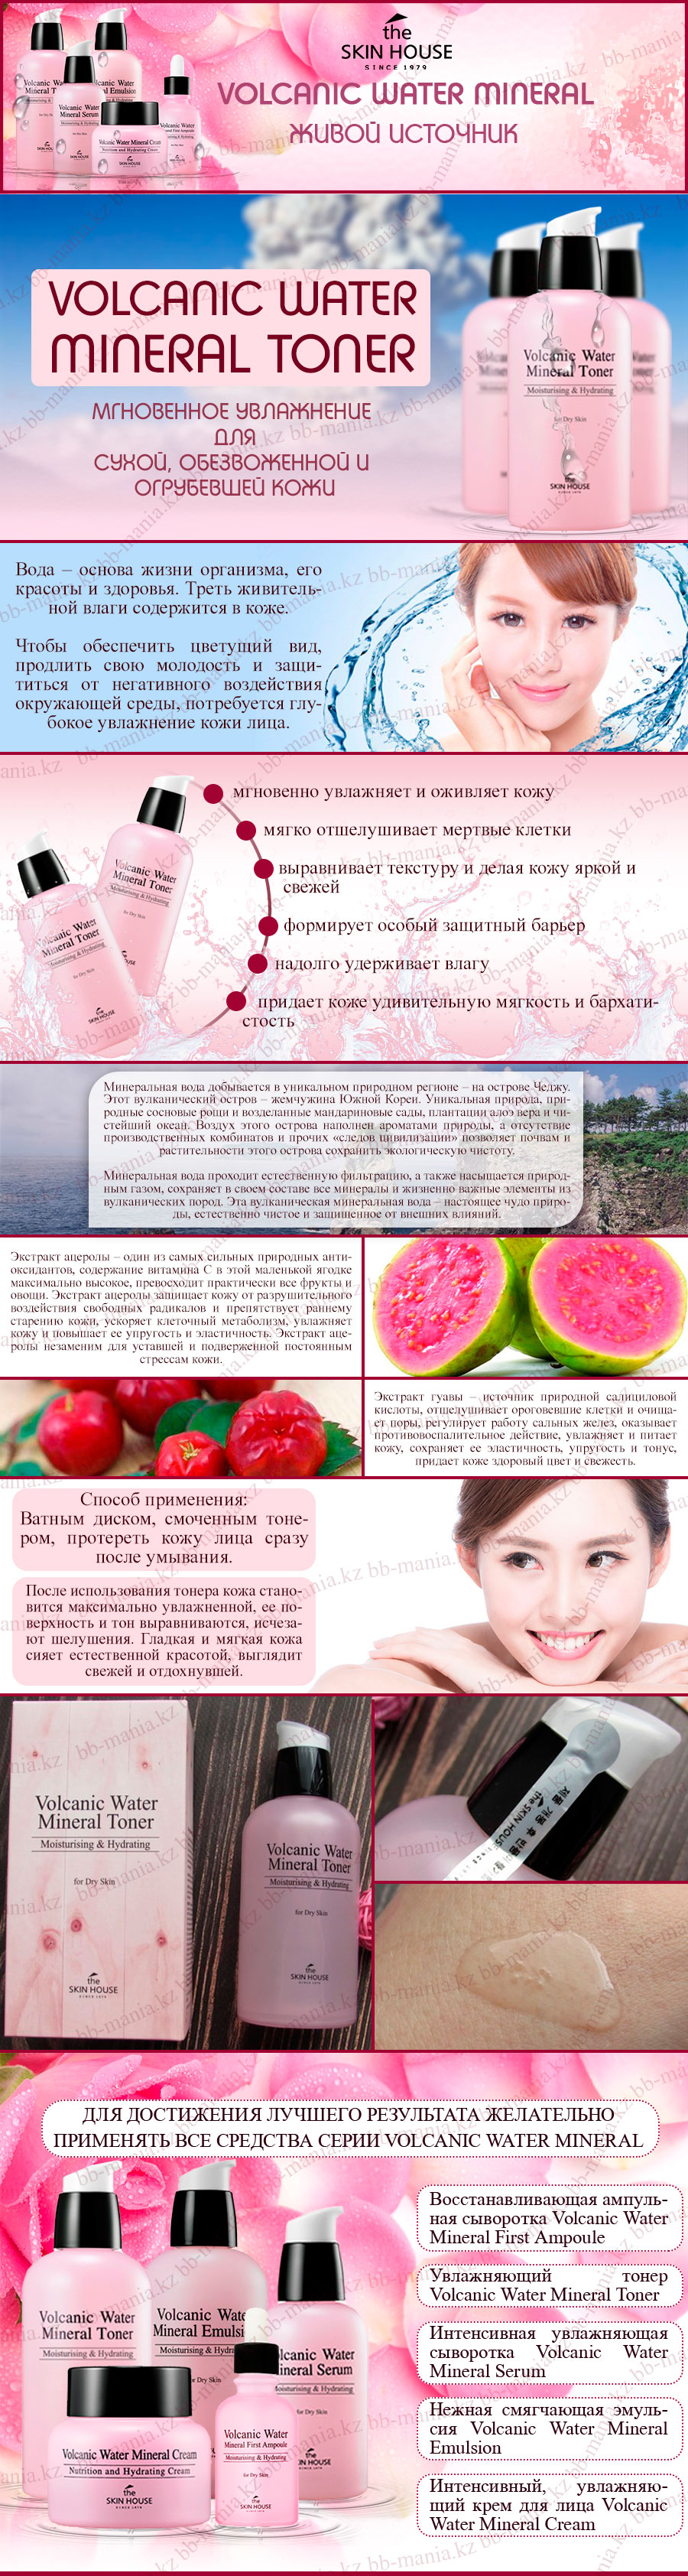 Volcanic-Water-Mineral-Toner-[The-Skin-House]-min